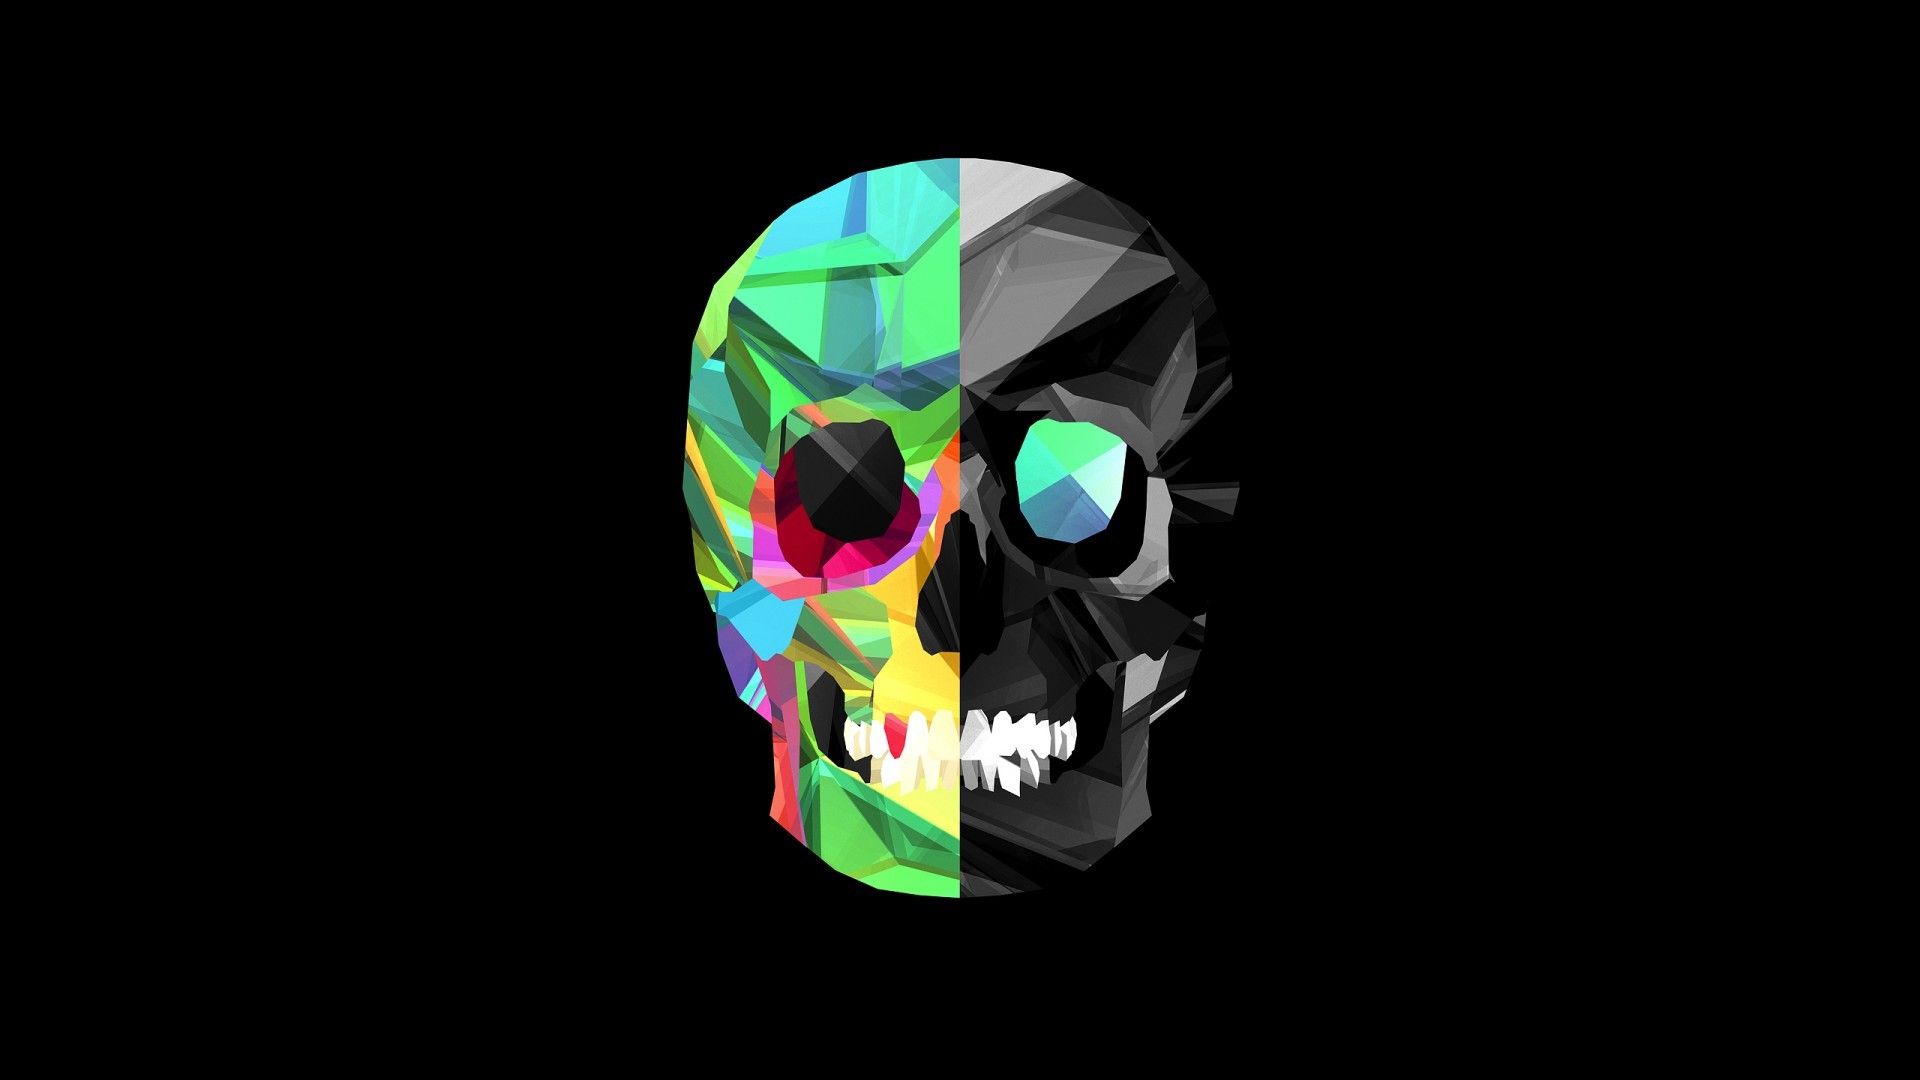 1920x1080 Awesome skull wallpaper (71 Wallpapers)